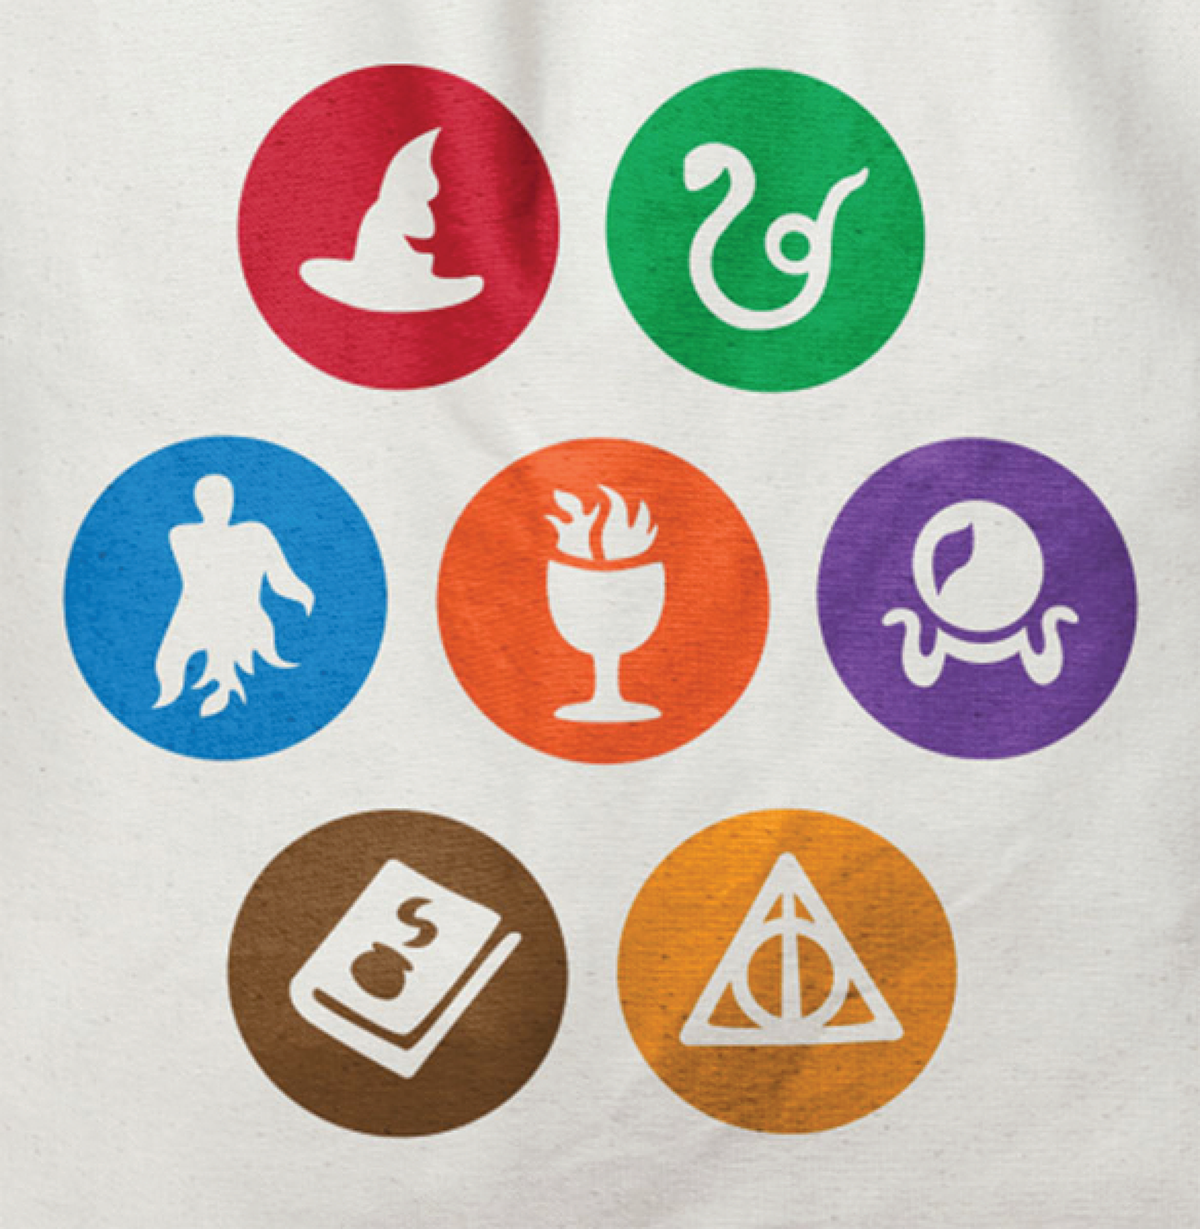 Harry Potter Icons on Behance